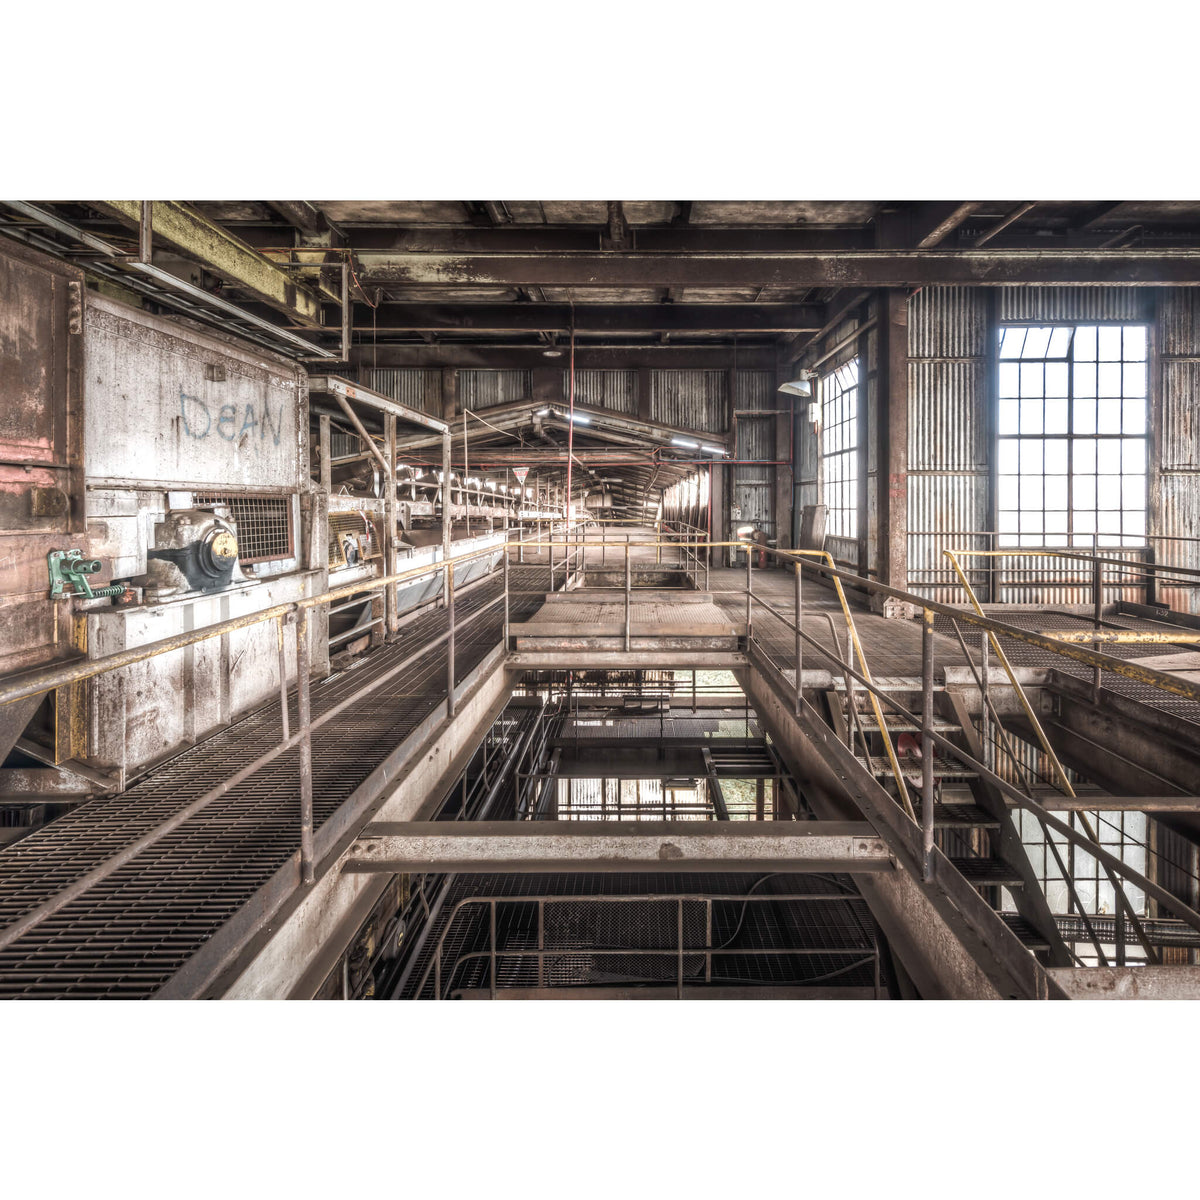 Top of the Bunker | Morwell Power Station